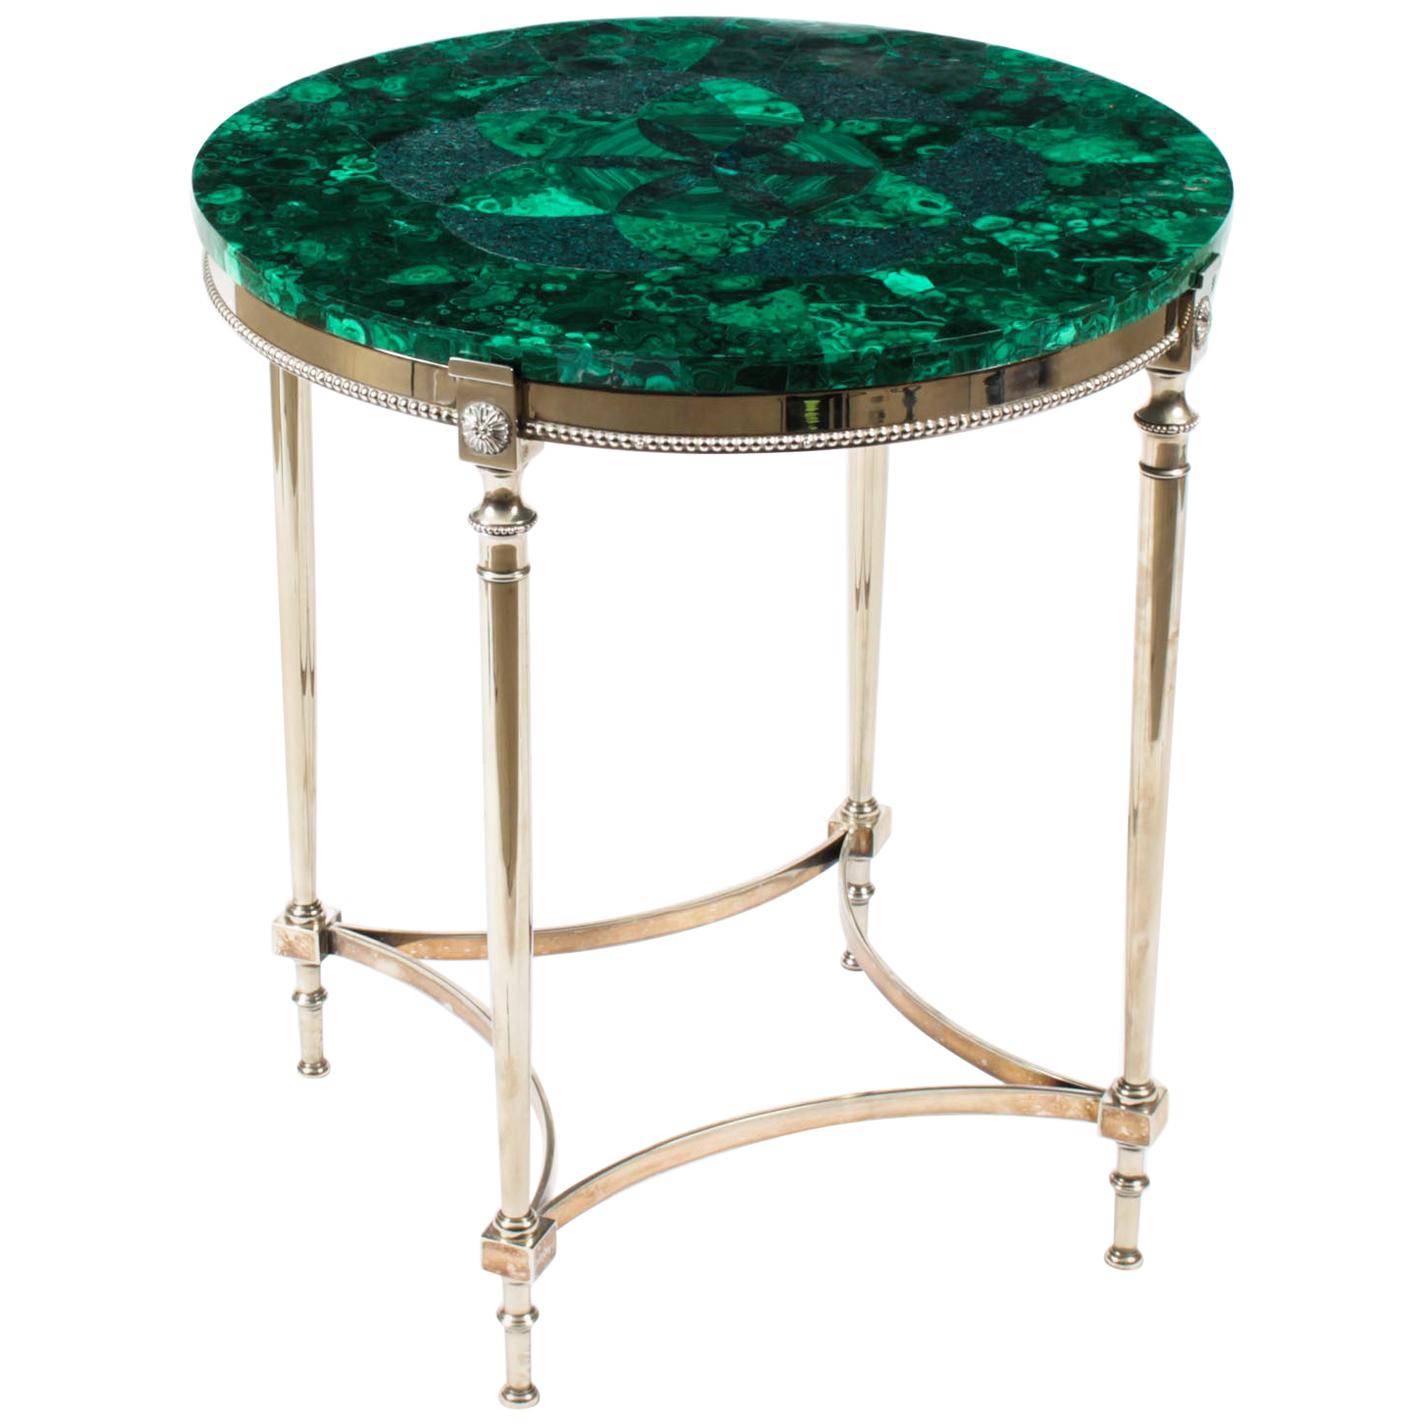 Antique French Art Deco Malachite Occasional Table, 1920s